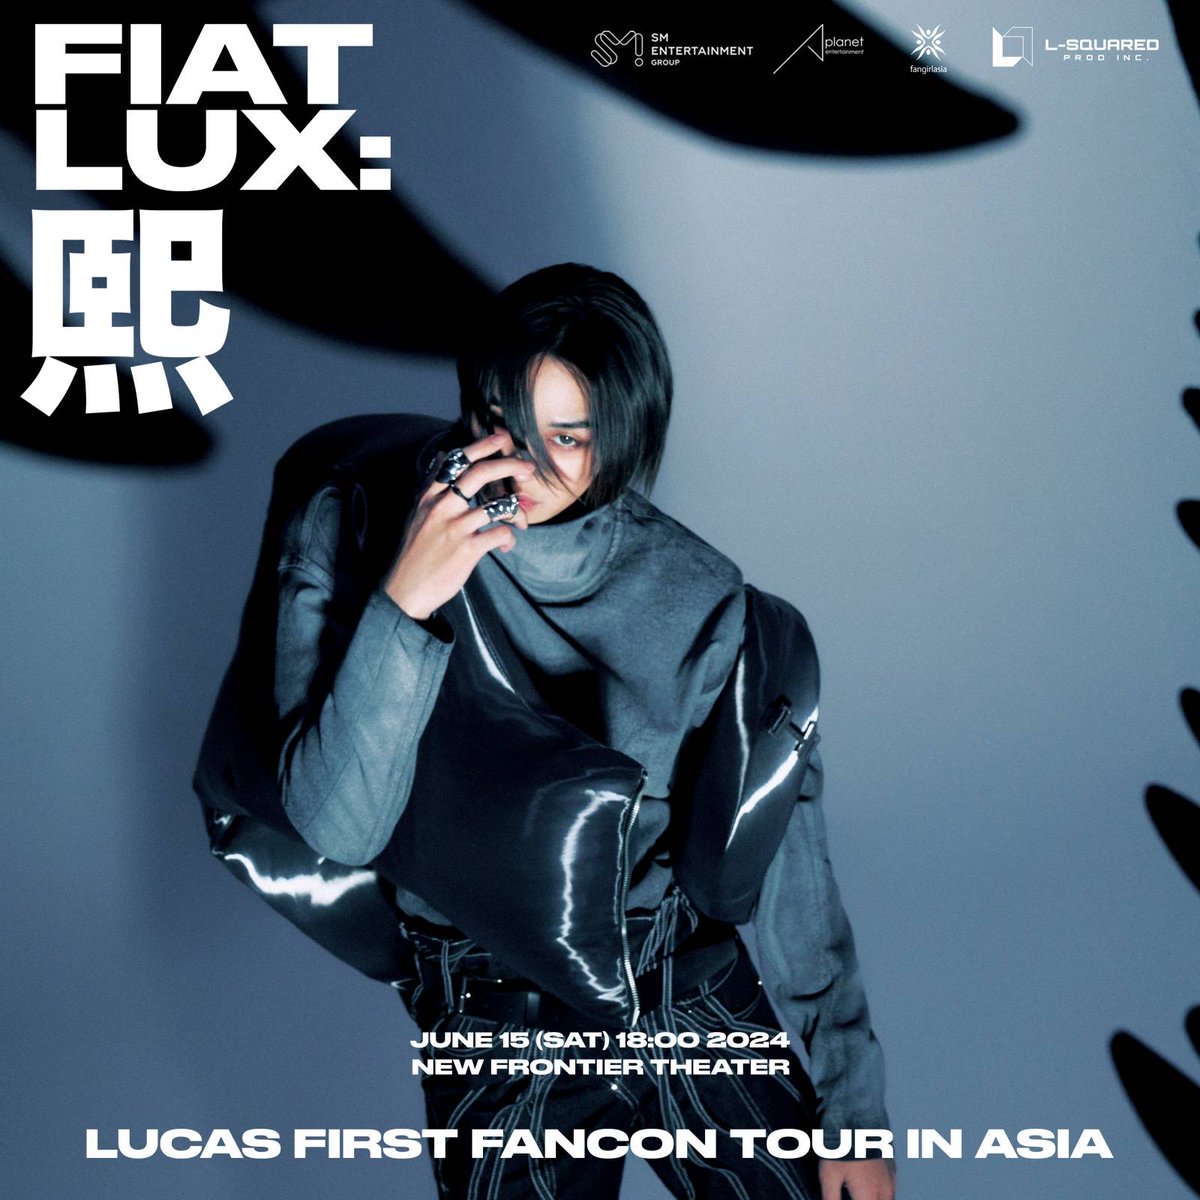 Ticketing in 2days!

LUCAS FANCON TOUR IN ASIA <FIAT LUX : 熙> MANILA
🗓️ June 15, 2024
📍 New Frontier Theater
🎟️ TicketNet Outlets/Online
(on sale: May 1, 10AM)

Presented by @lsquaredprodph

#LUCAS
#FIATLUX #FANCON #TOUR
#LSquaredProdPH
#LucasFirstFanconTourInManila